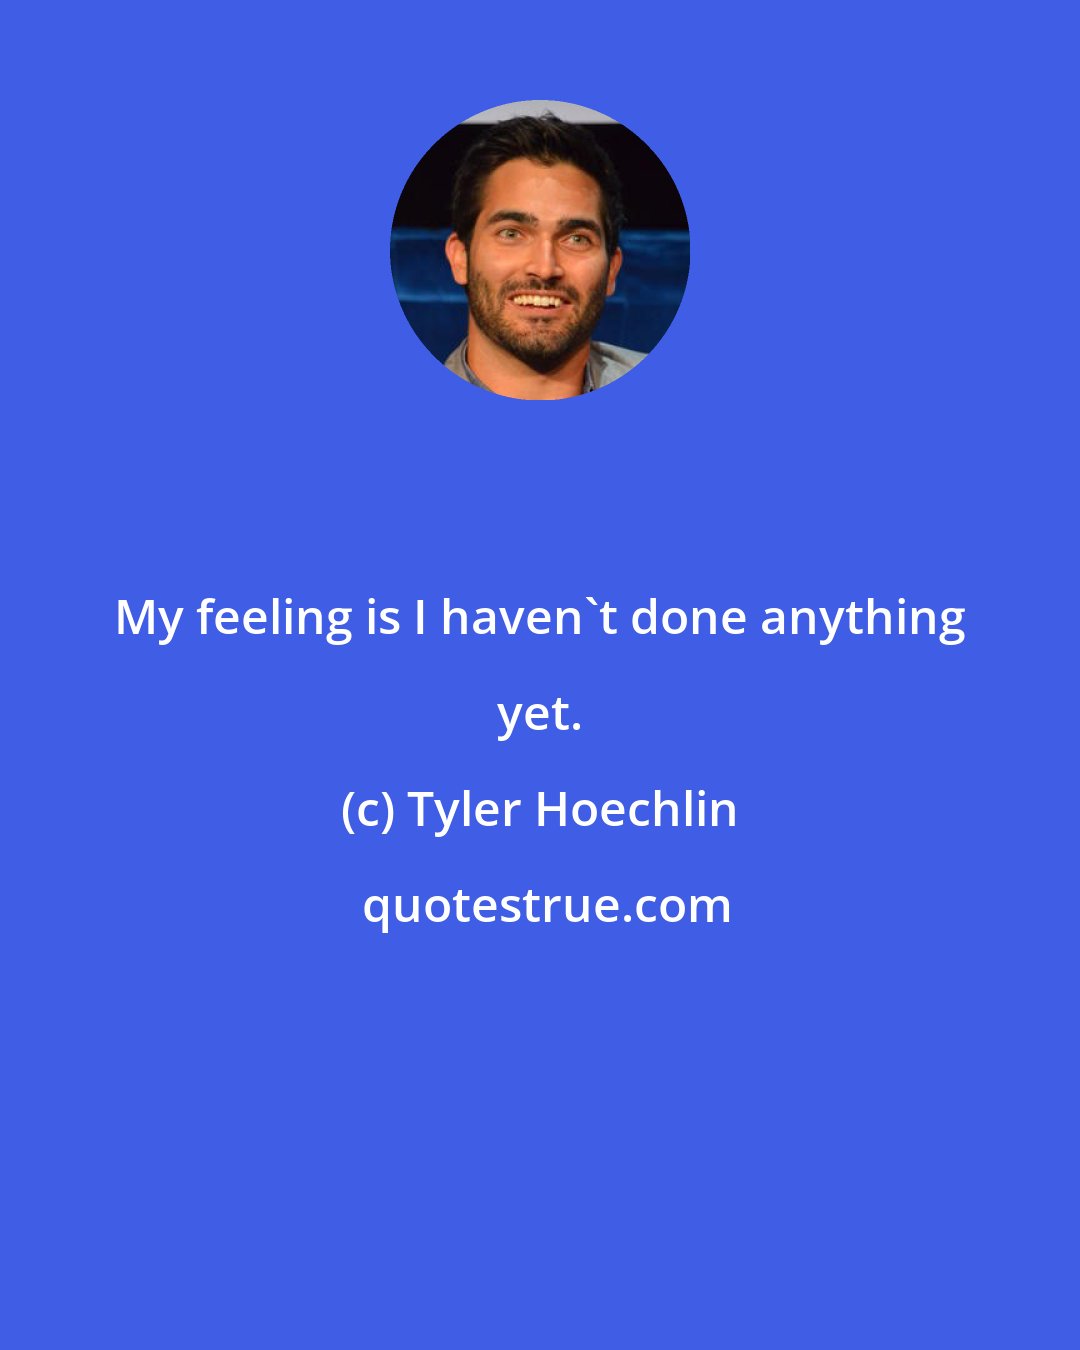 Tyler Hoechlin: My feeling is I haven't done anything yet.